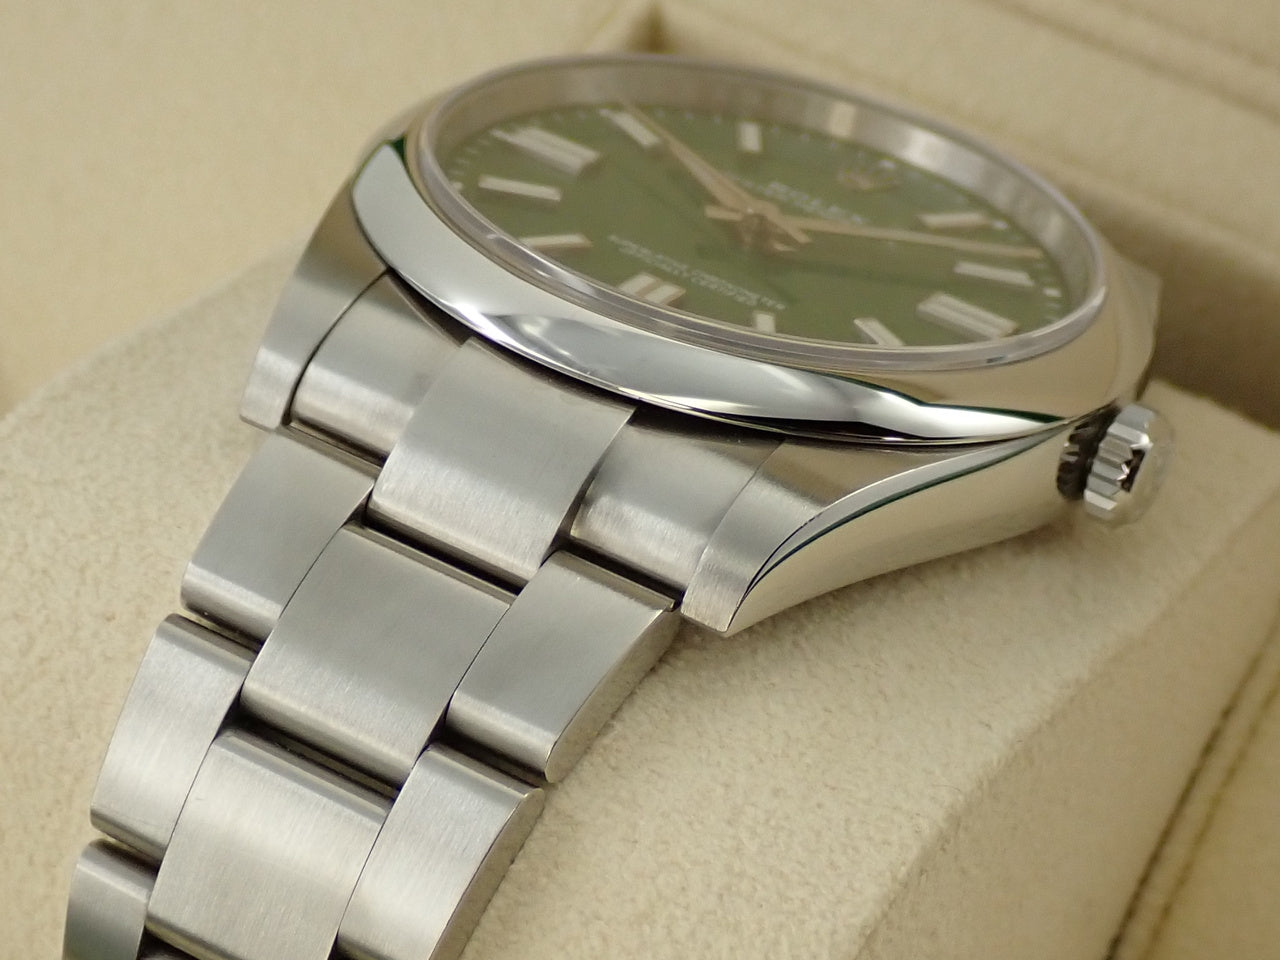 Rolex Oyster Perpetual 41 Ref.124300 SS Green Dial